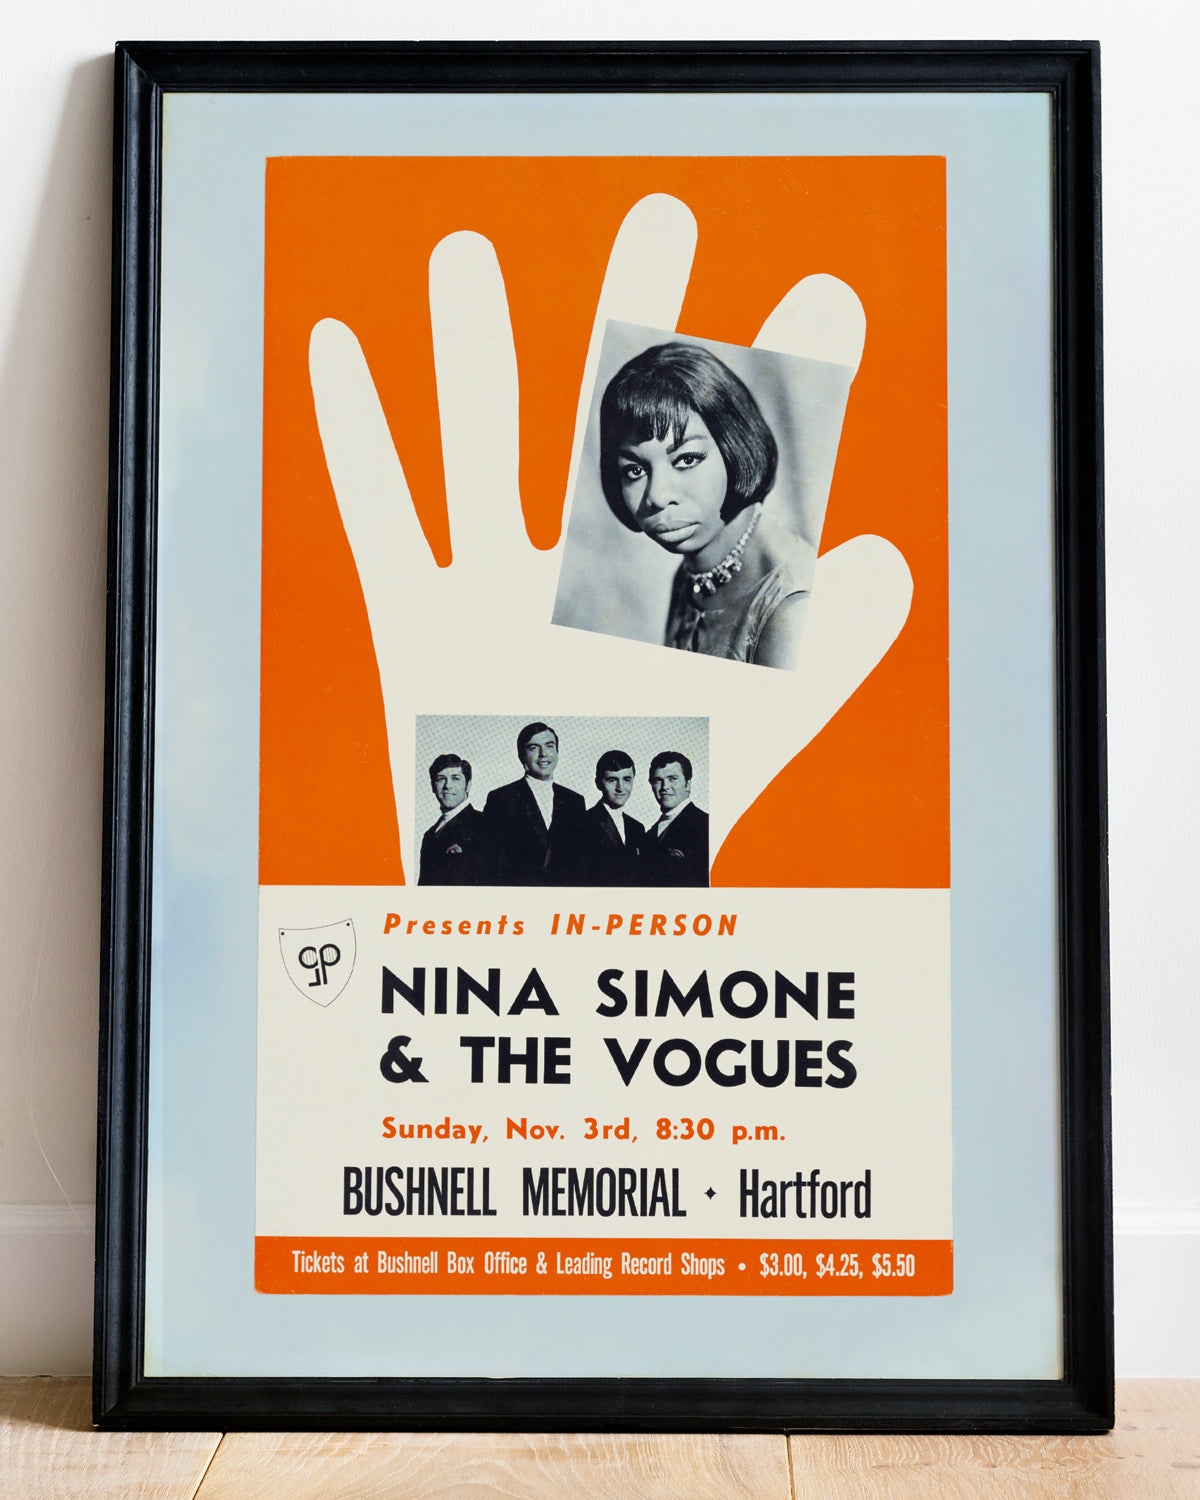 Poster for a concert by Nina Simone and The Vogues